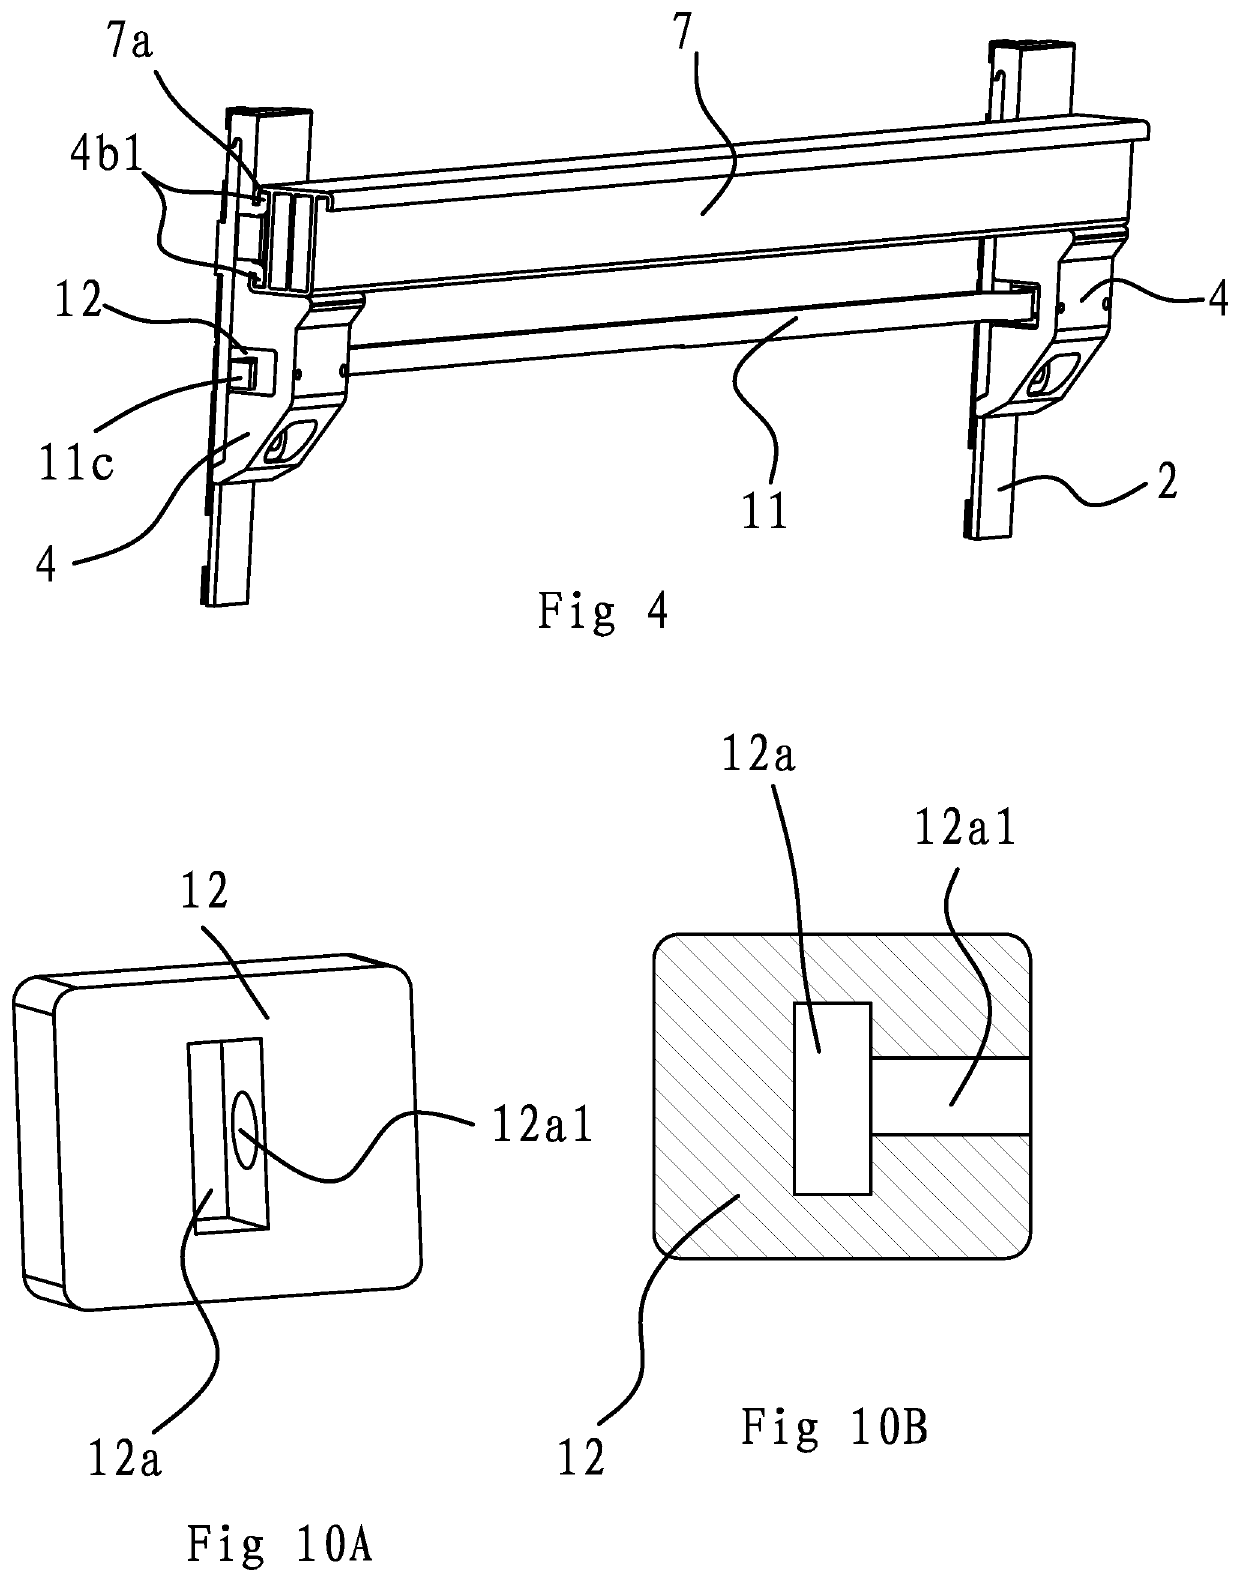 A Carriage Decking Device